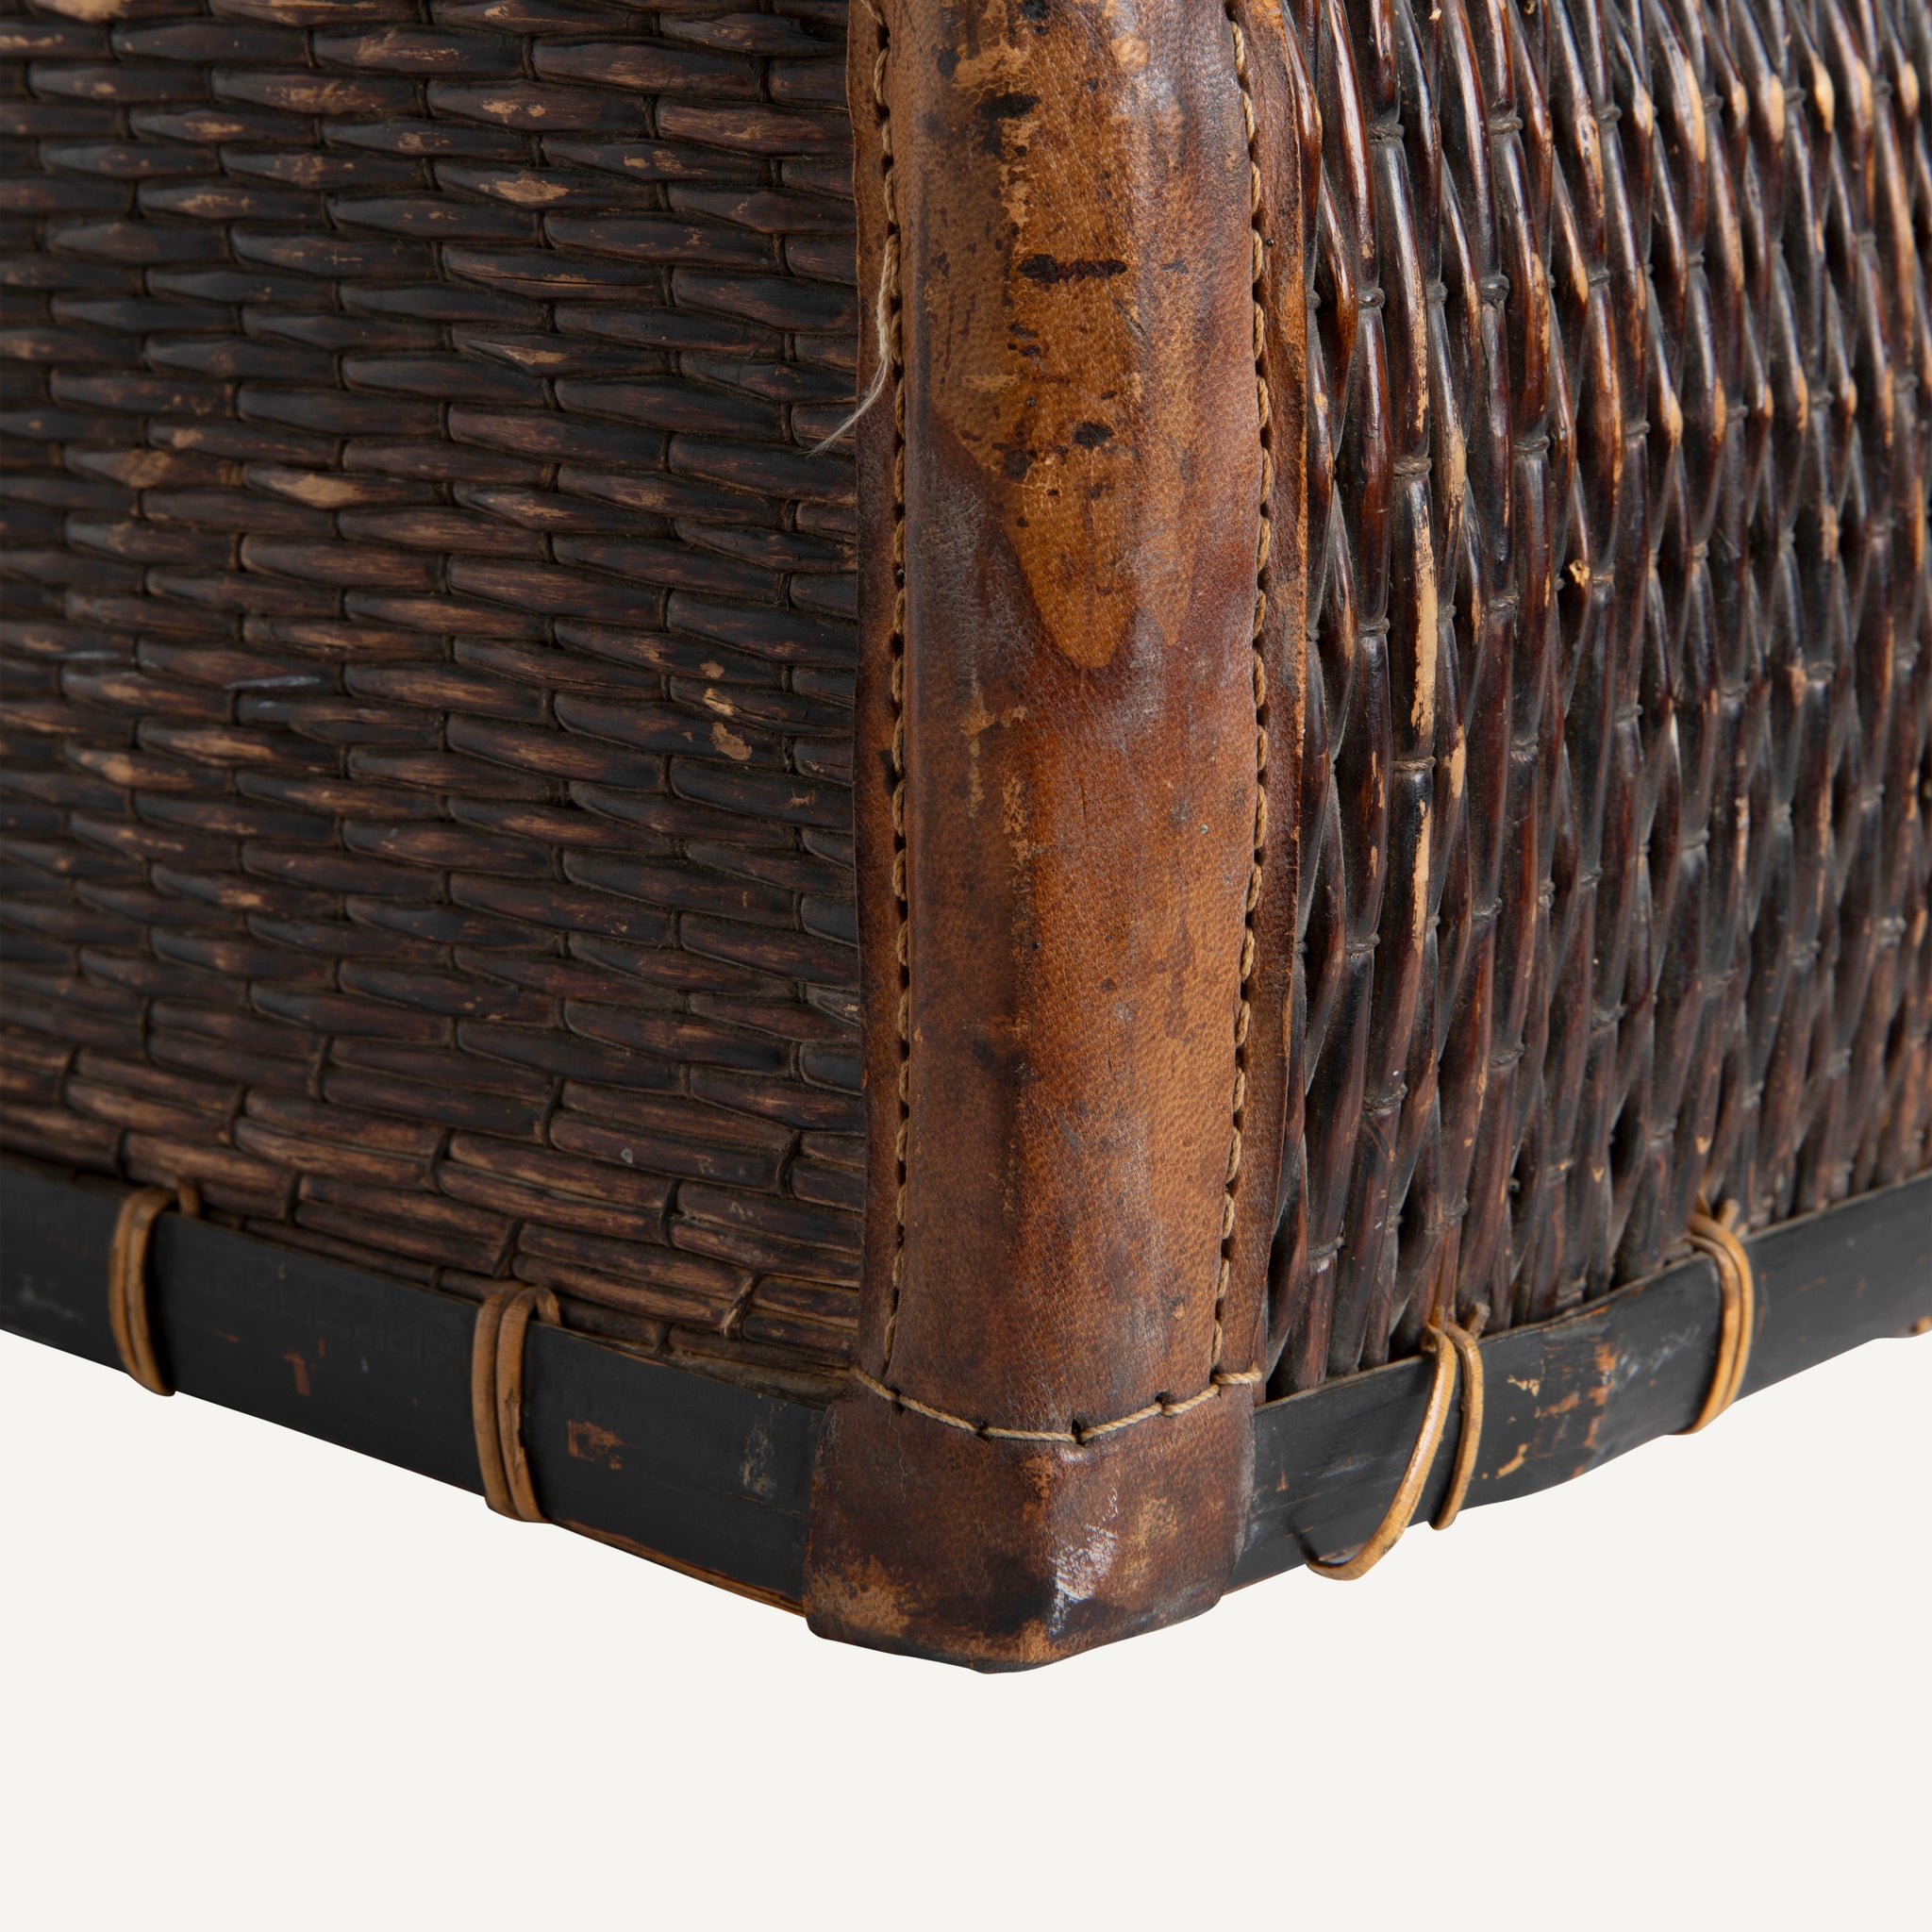 ANTIQUE REED TRUNK